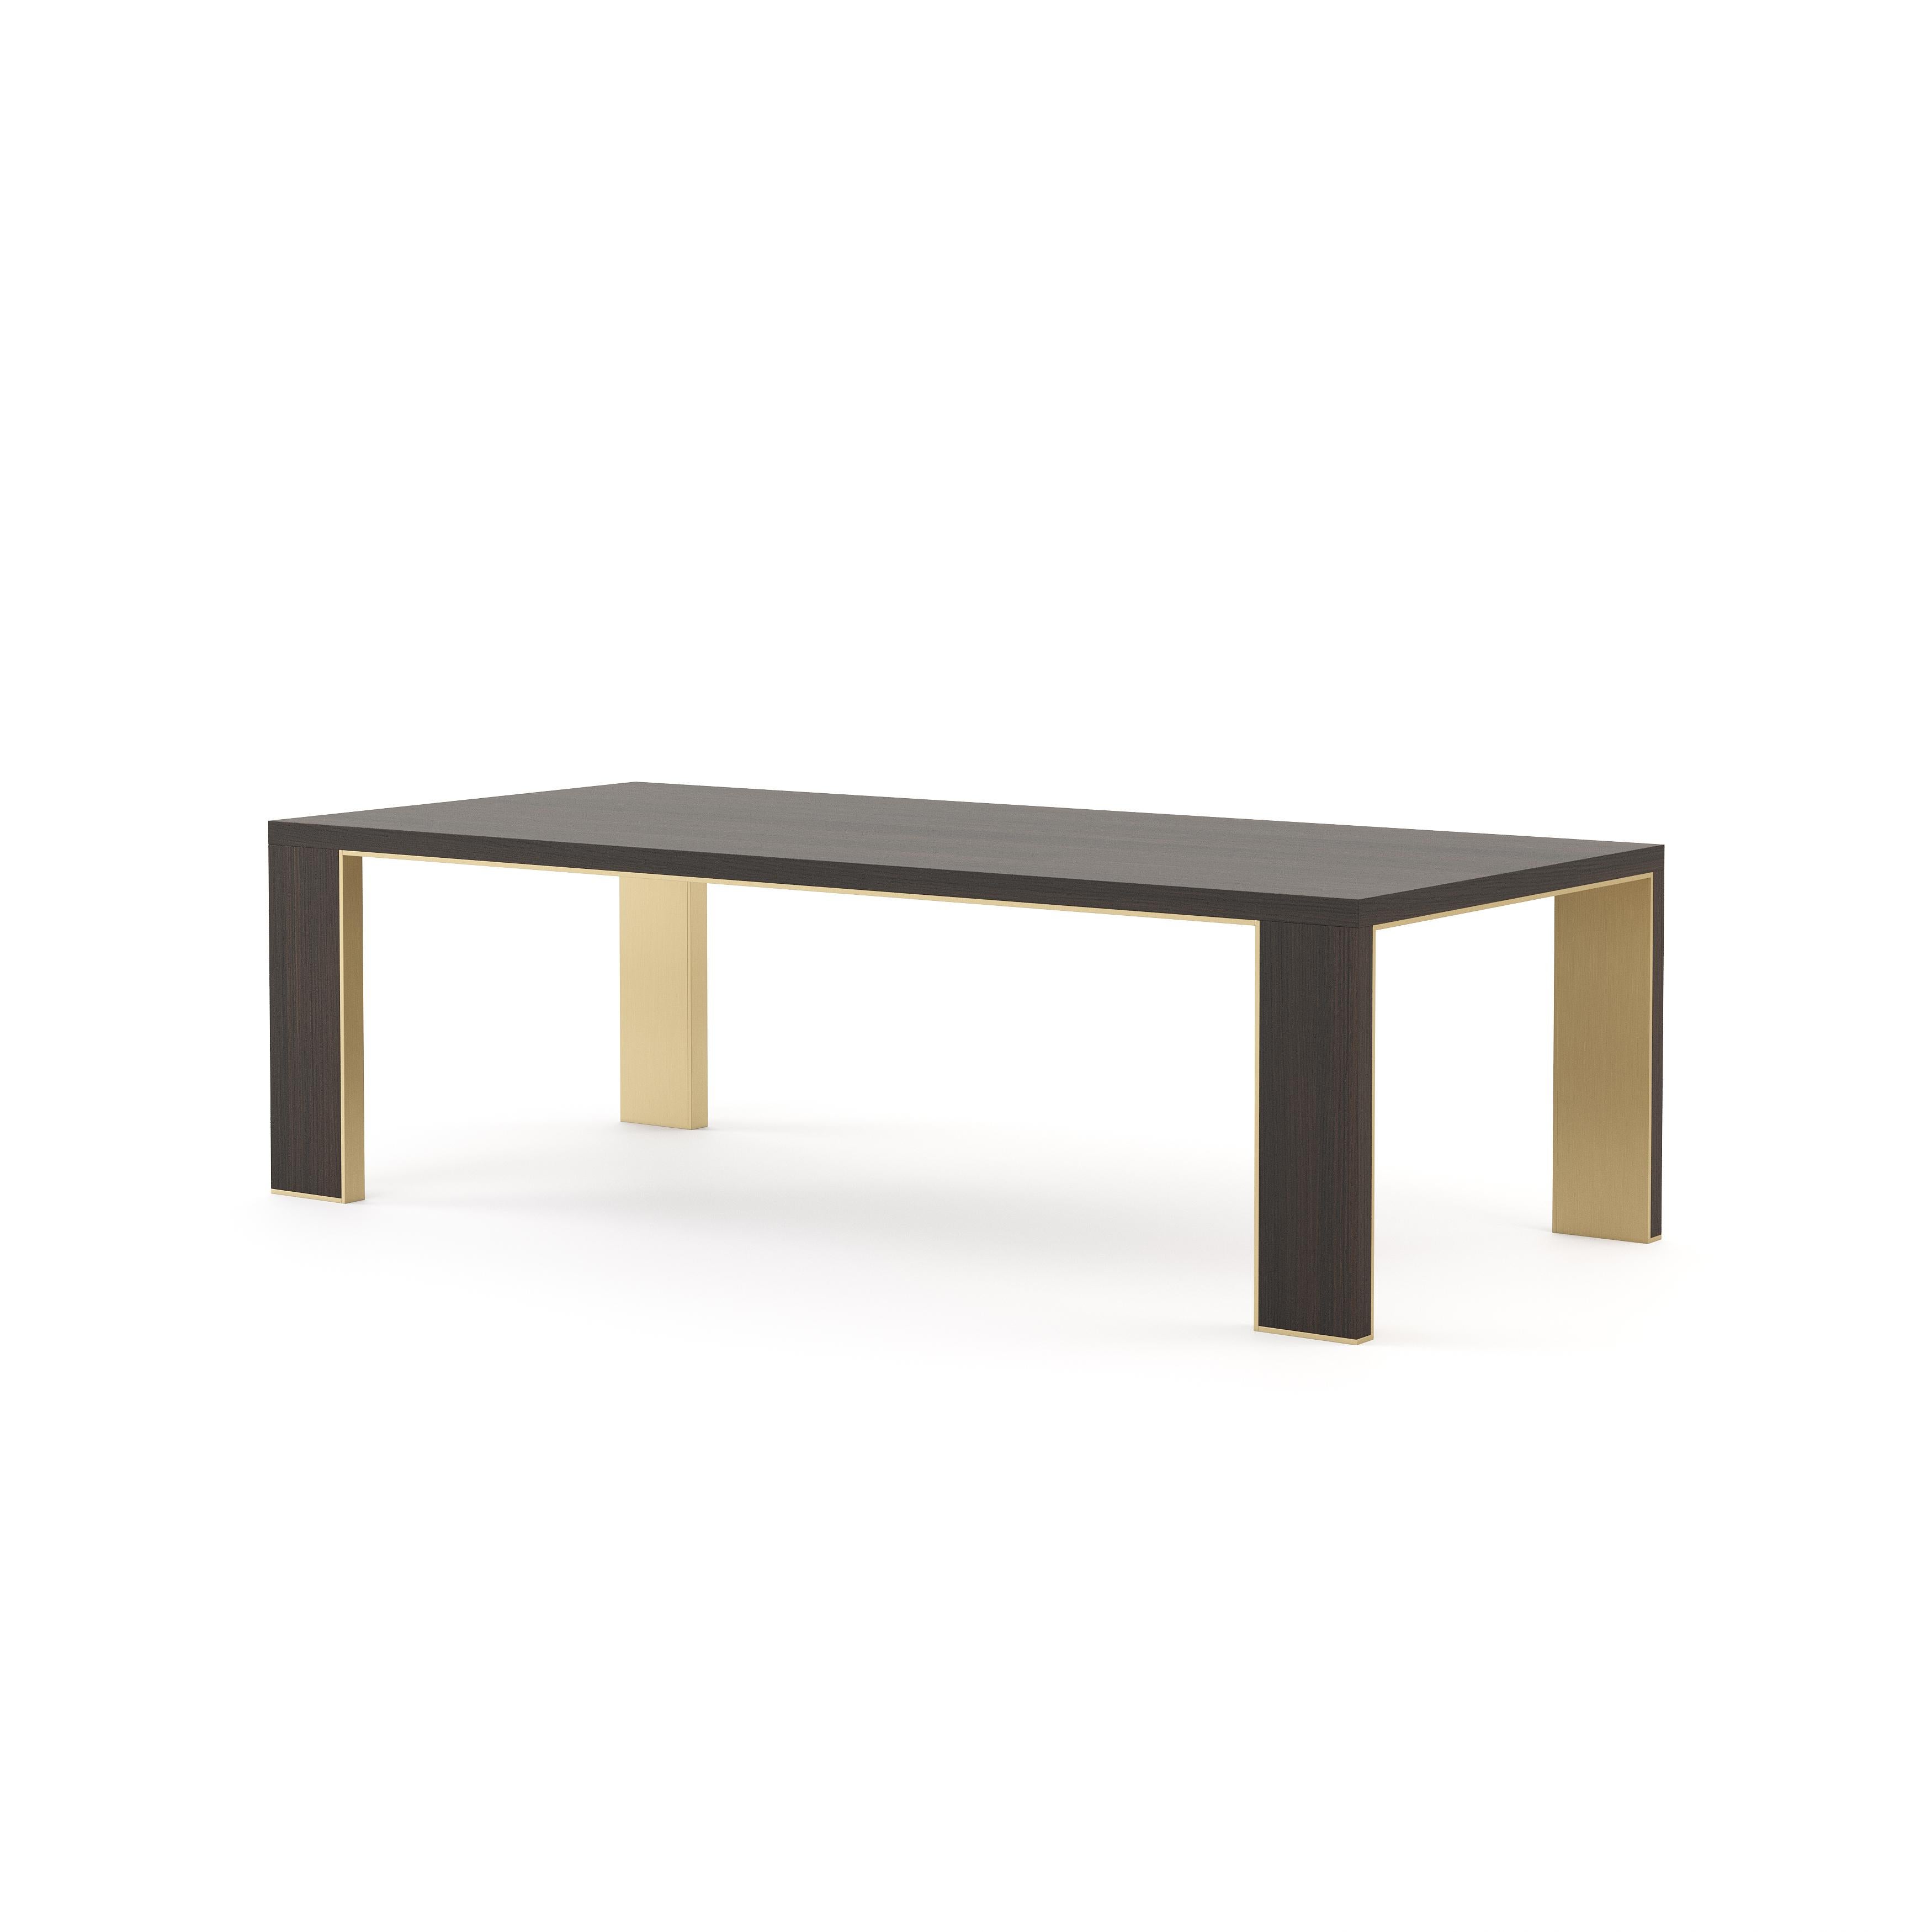 From the soft edges to the visually compelling colors, the Eda dining table is a robust piece that gives style and glamour to any space. The Eda table is an everyday piece that balances luxury and functionality. It enhances elegance and simplicity